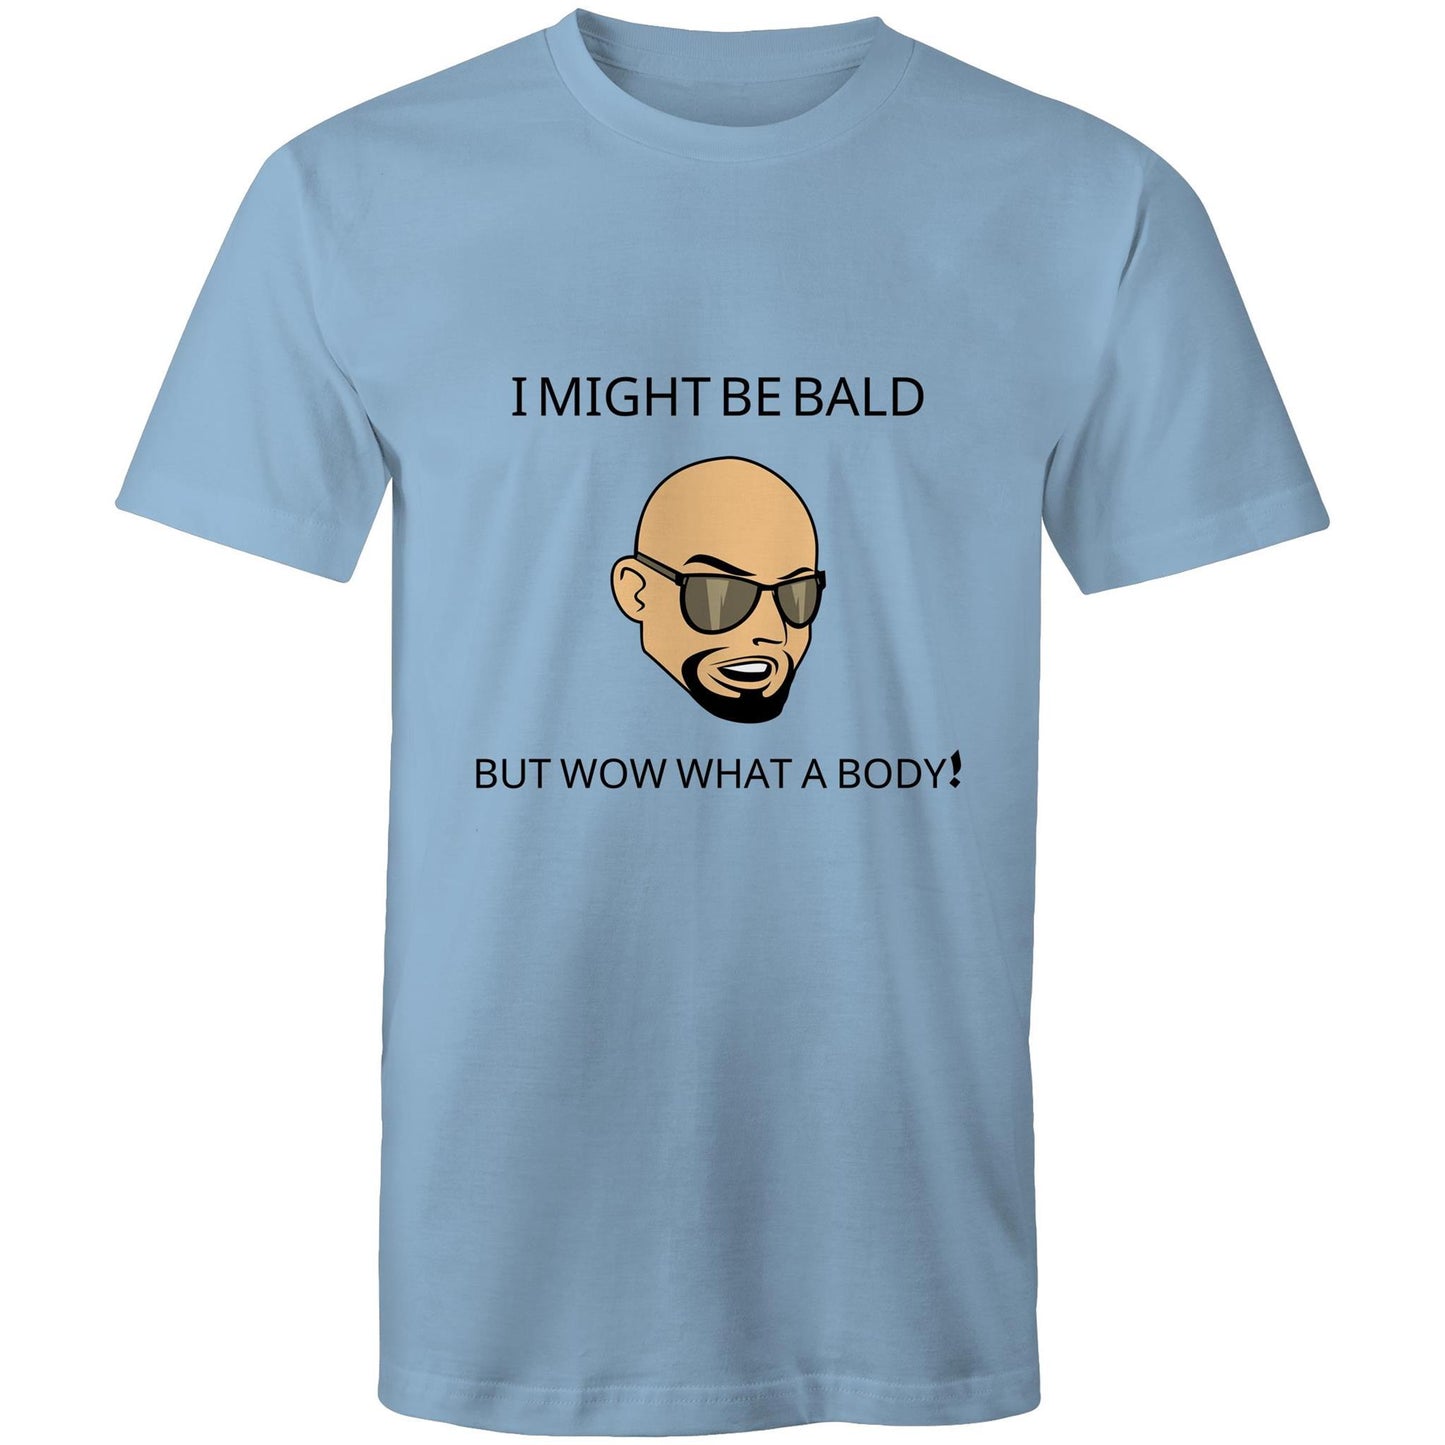 I Might Be Bald But Wow What a Body - Mens T-Shirt